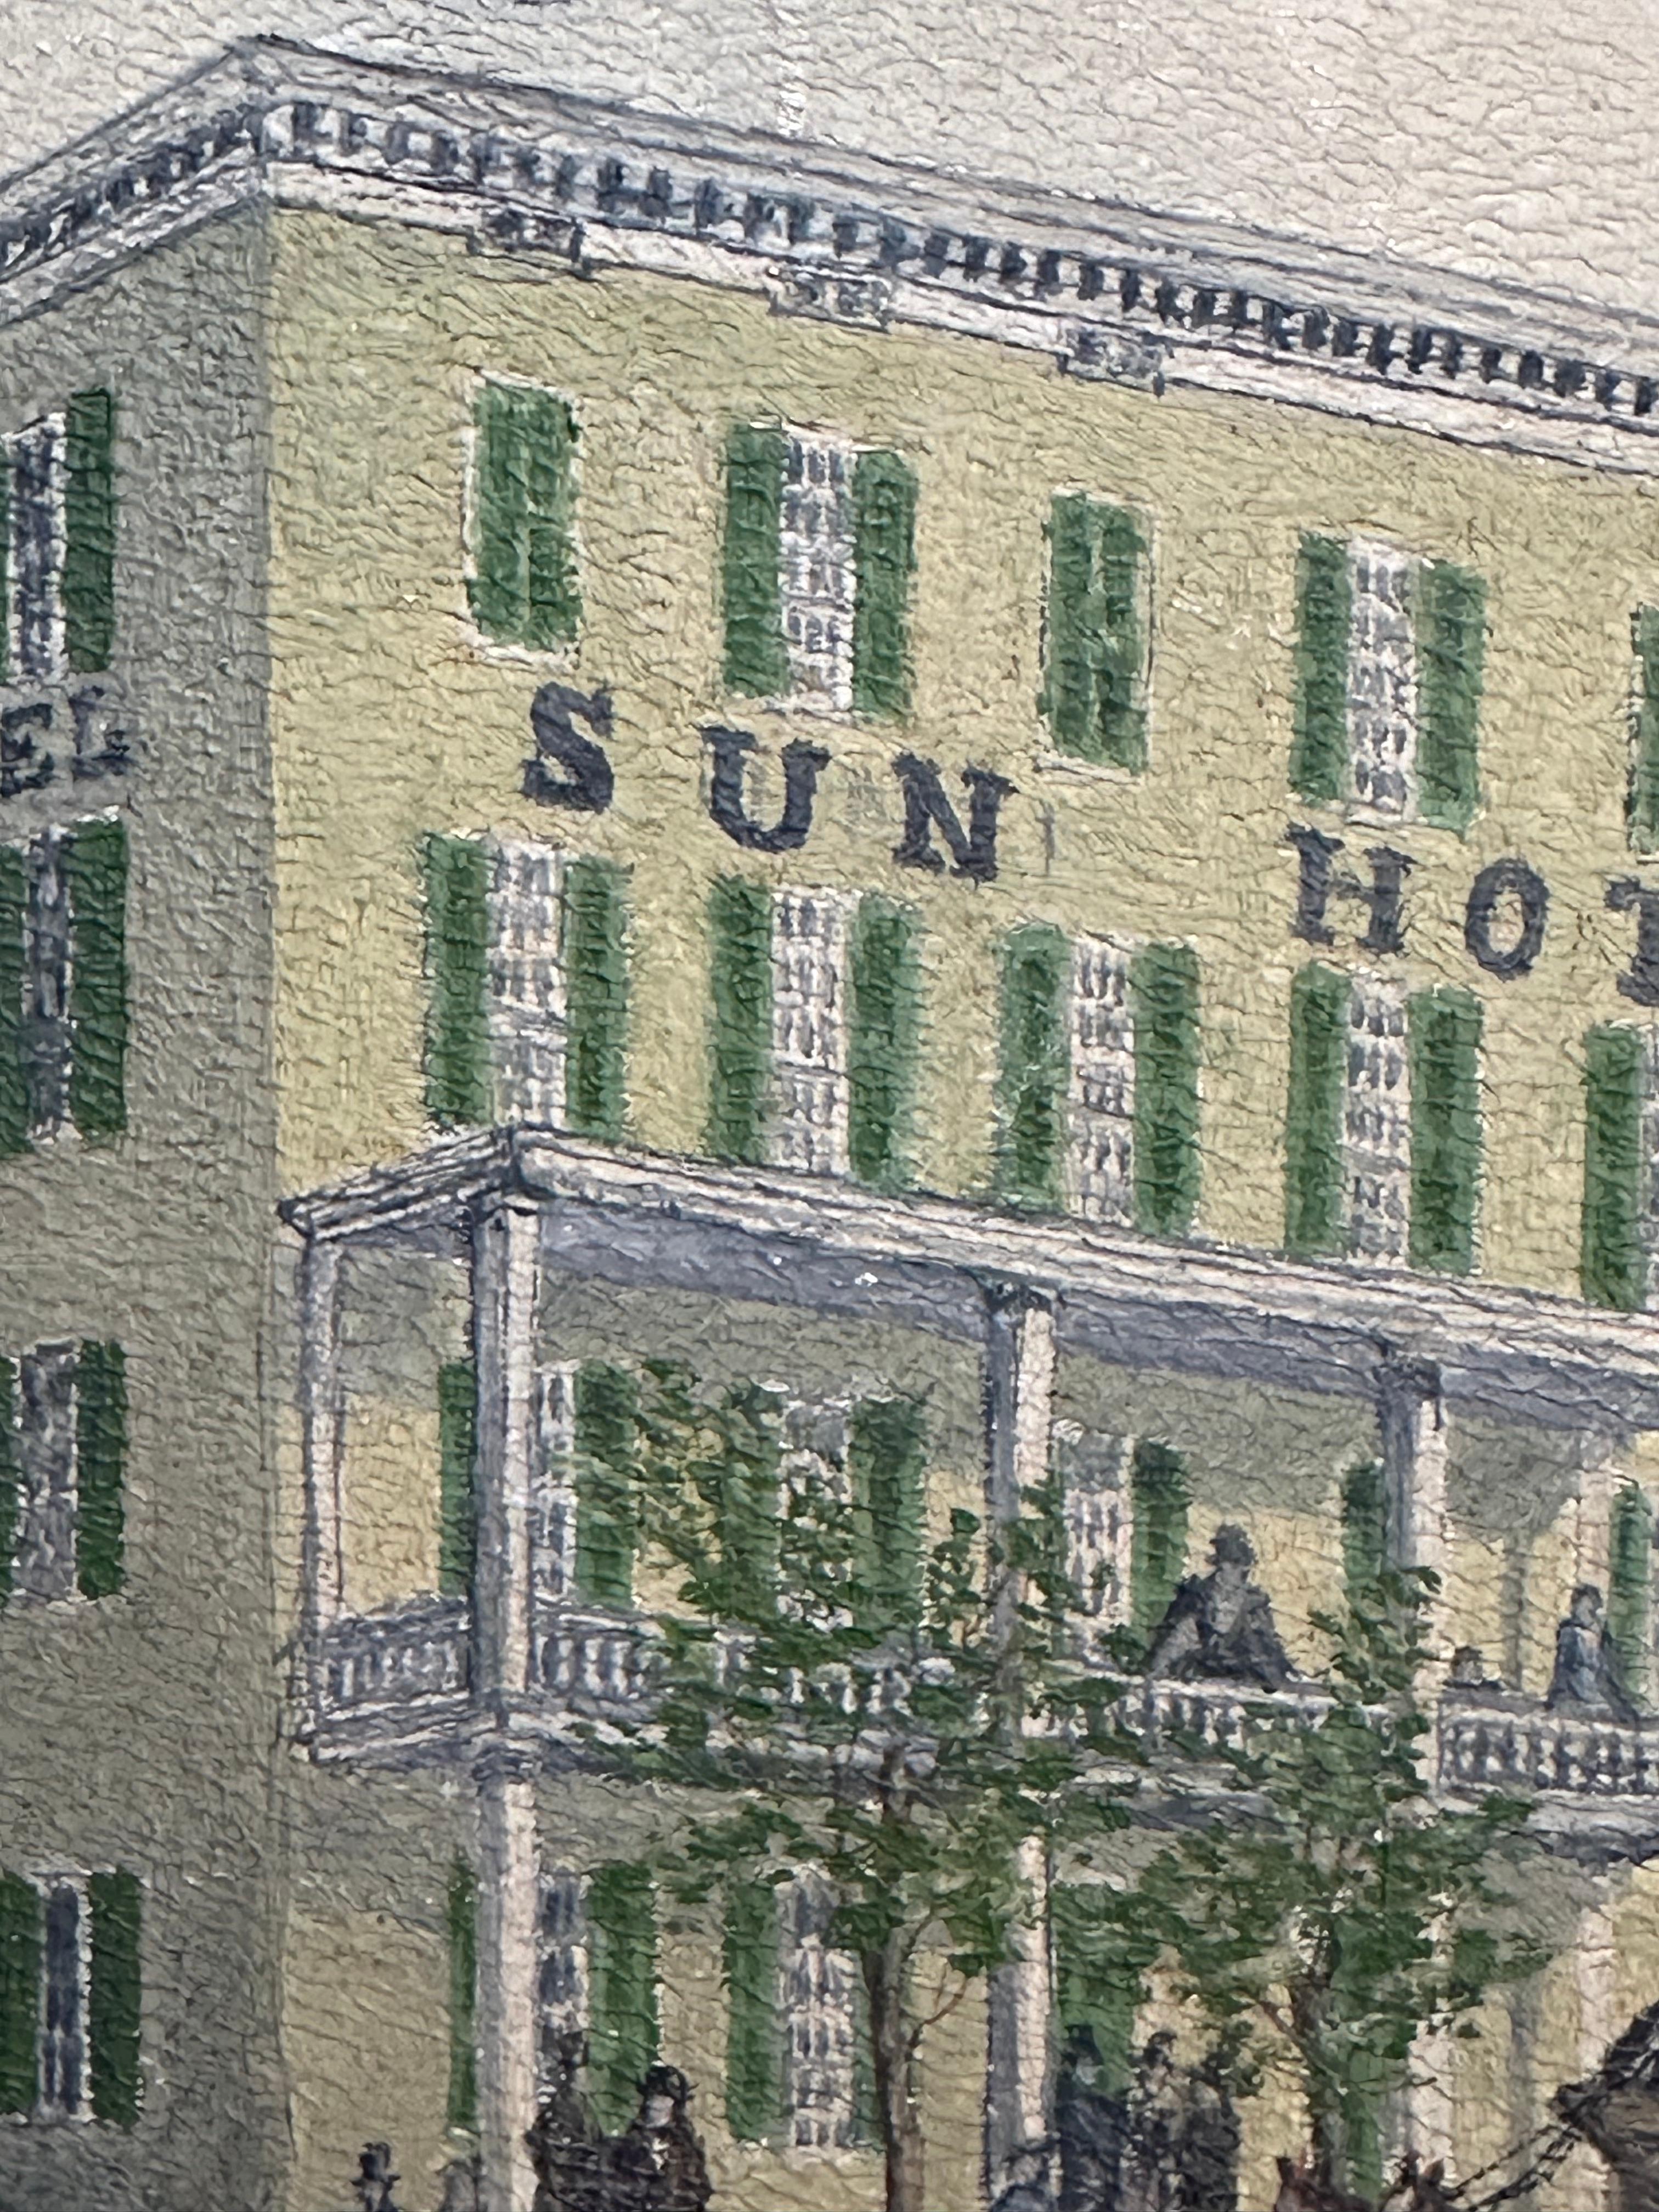 Painting depicting Sun Inn or Sun Hotel, ca. 1880.  Oil on academy board measures 8 x 10 inches. Signed lower right. Excellent condition. Unframed. 

The painting notes that the building was erected in 1780. The painting itself dates ca. 1880. 